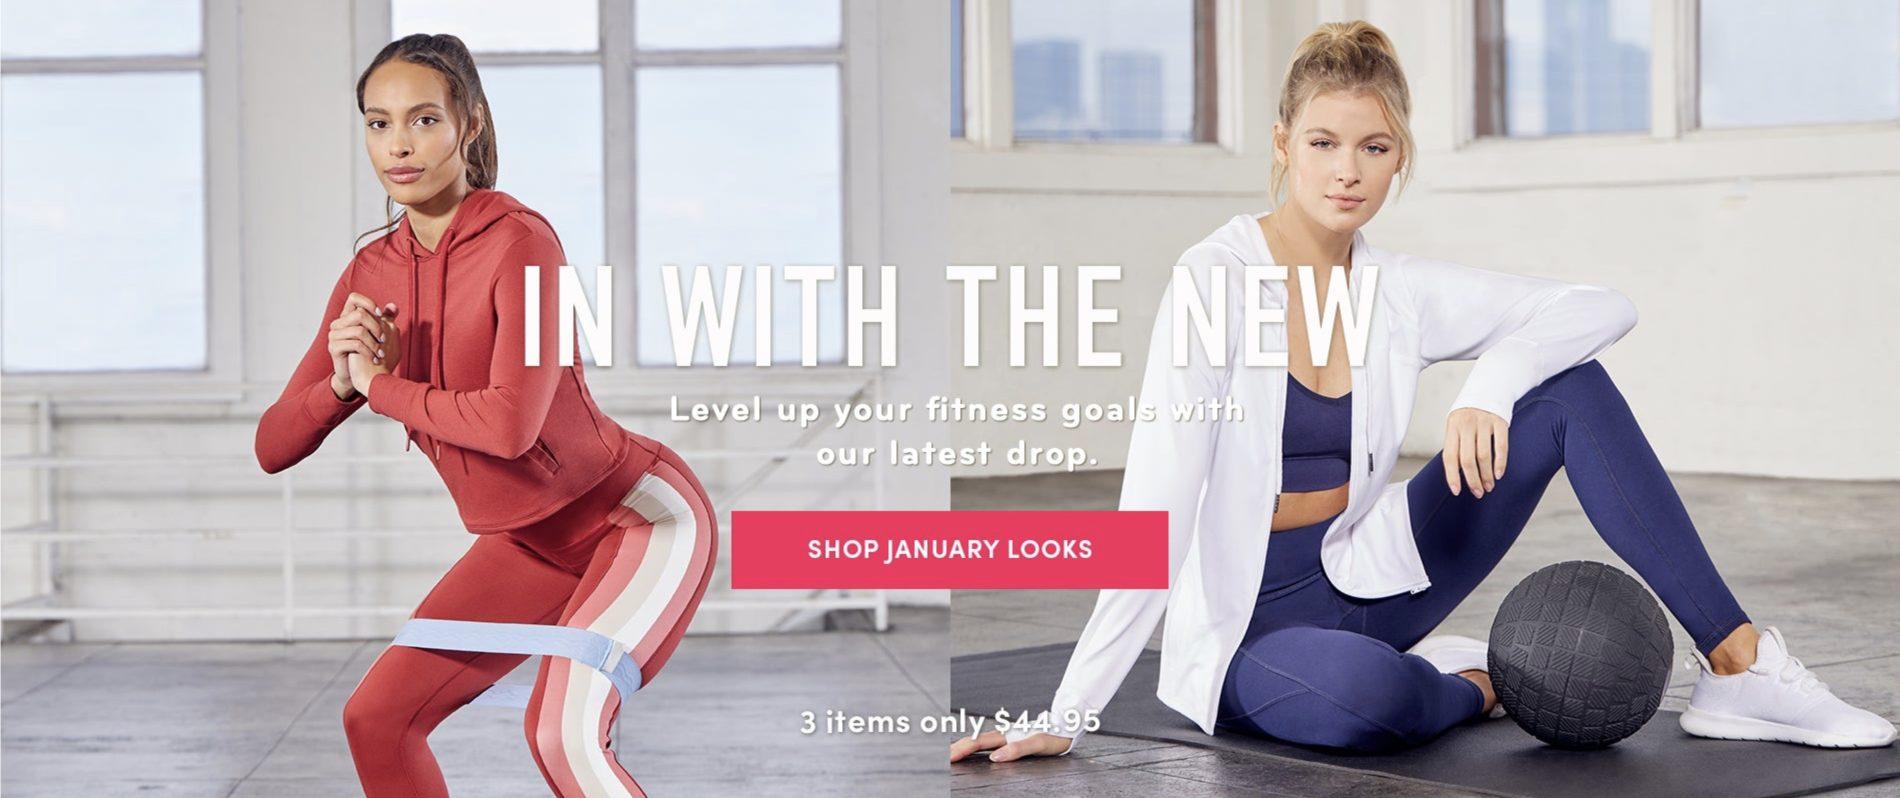 Ellie Women’s Fitness Subscription Box – January 2022 Reveal + Coupon Code!